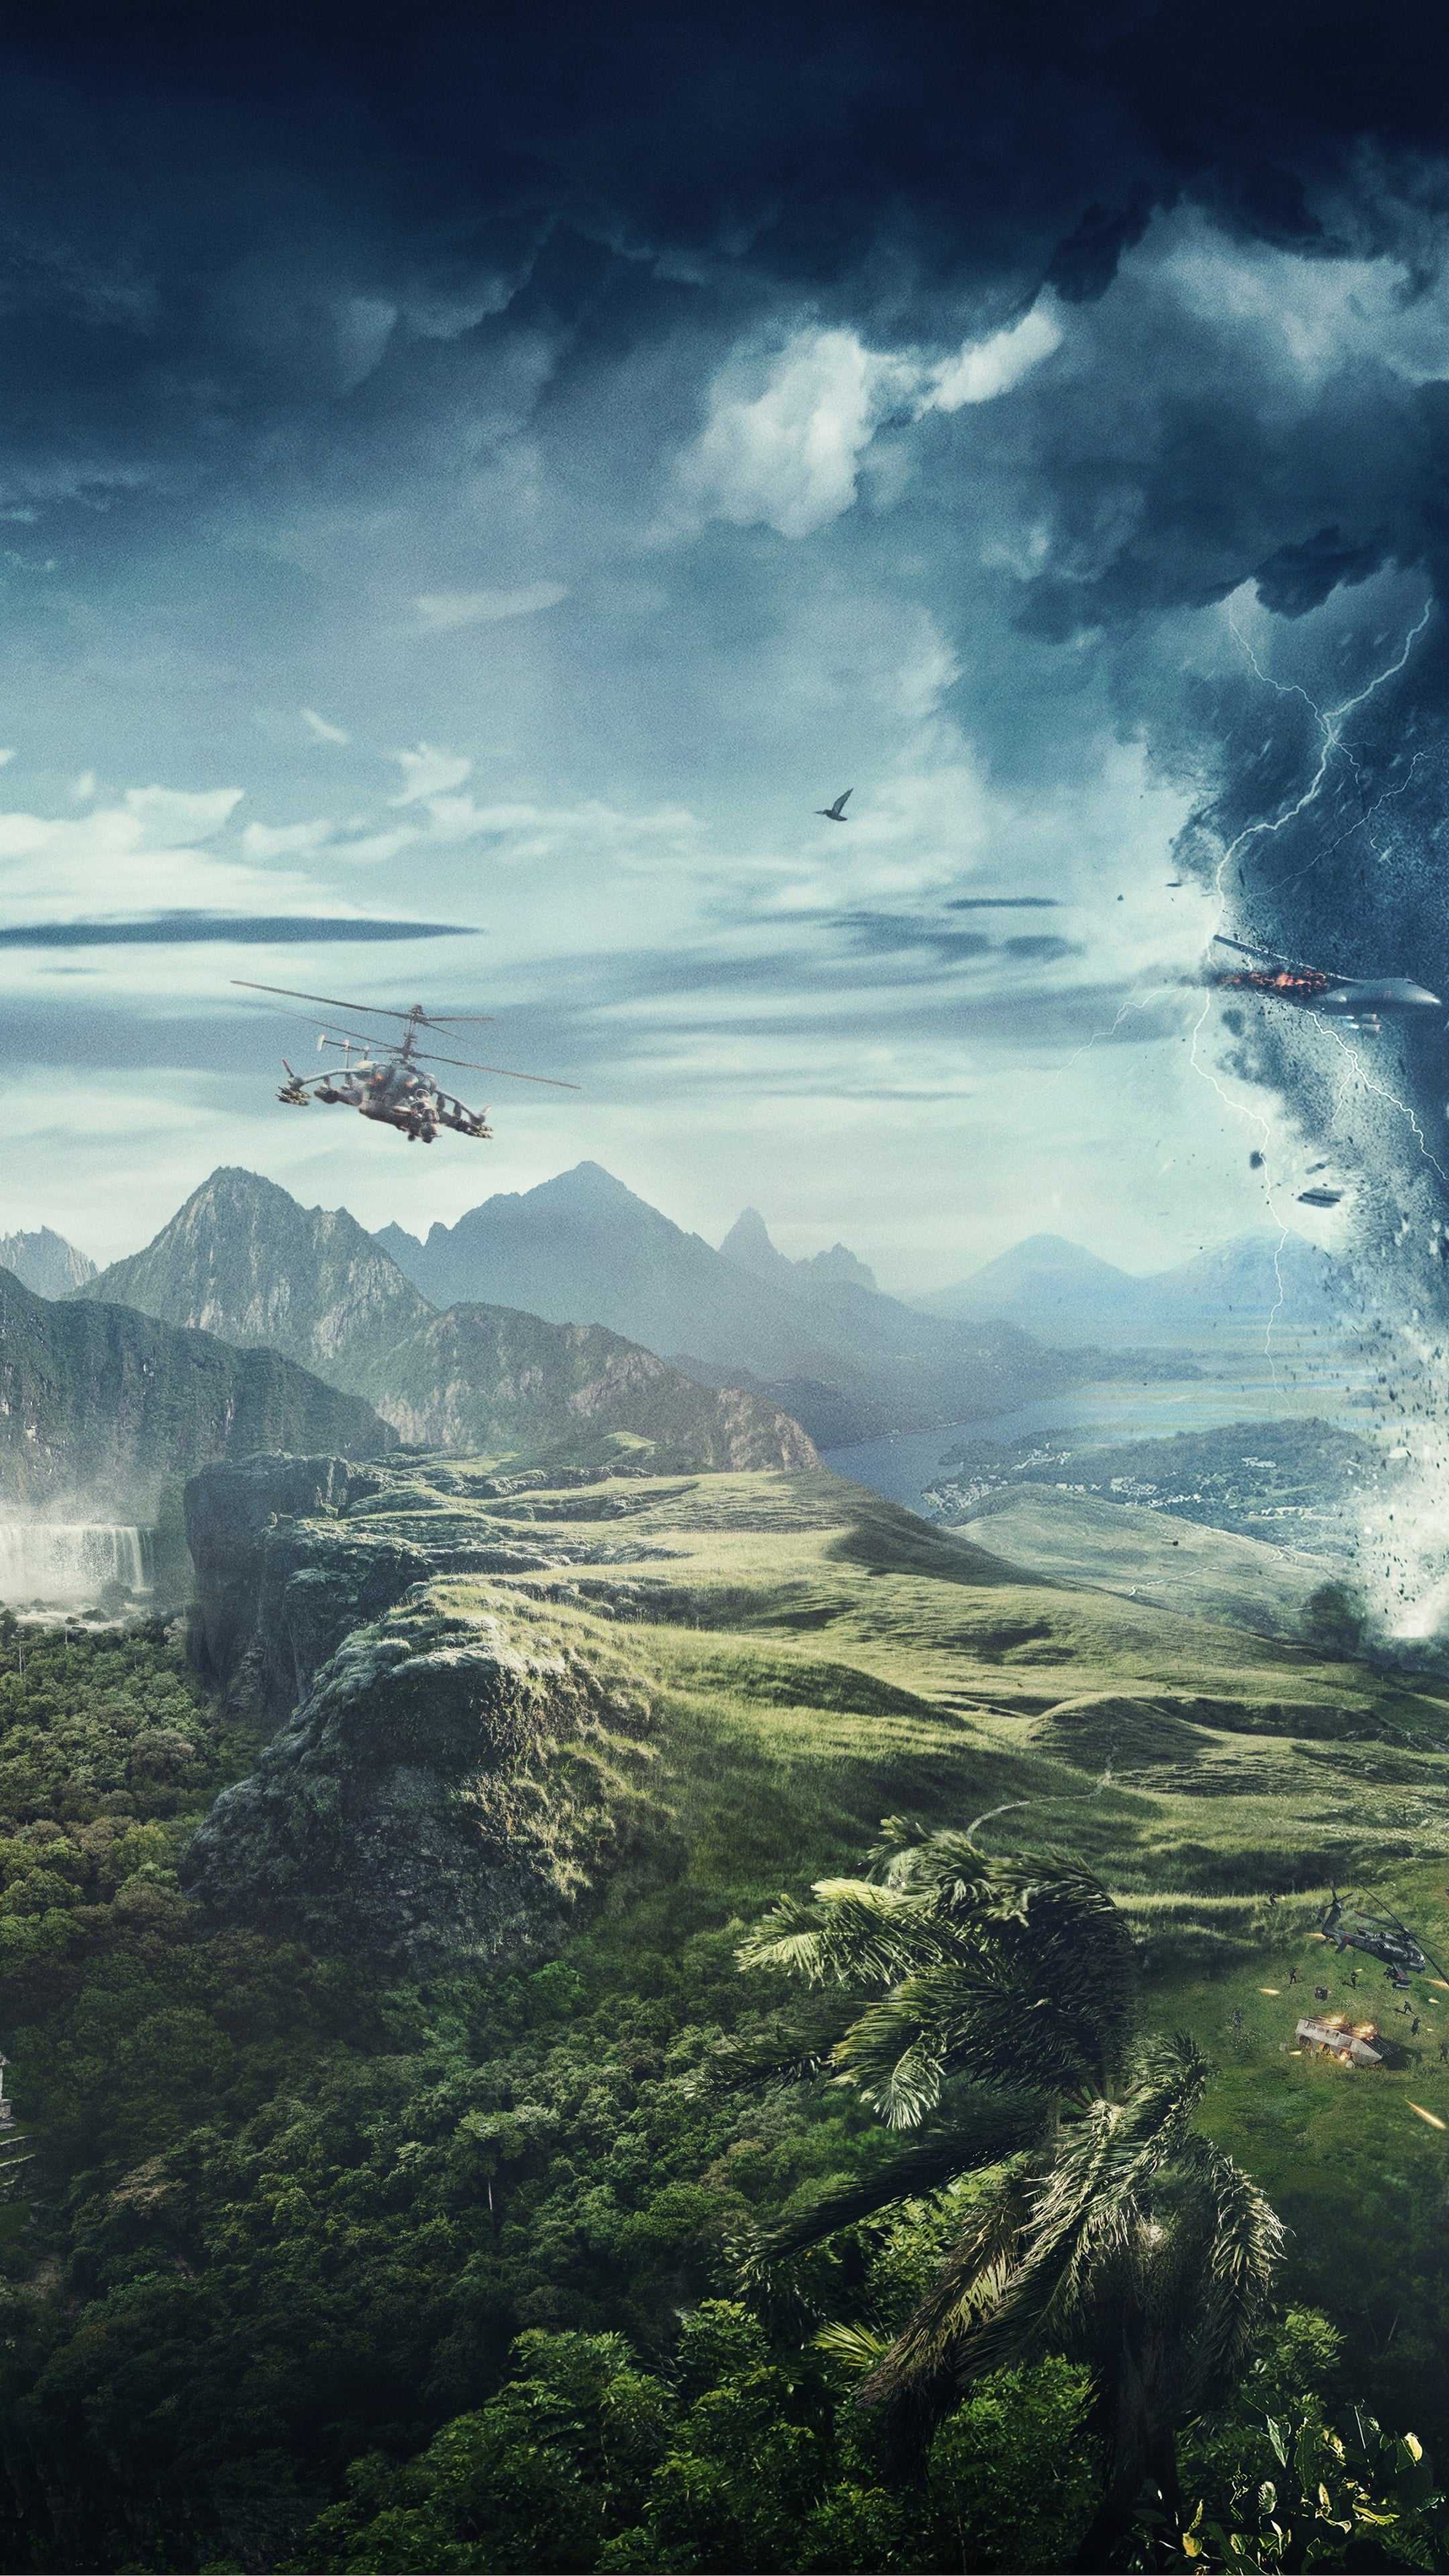 Just Cause 4 Wallpapers